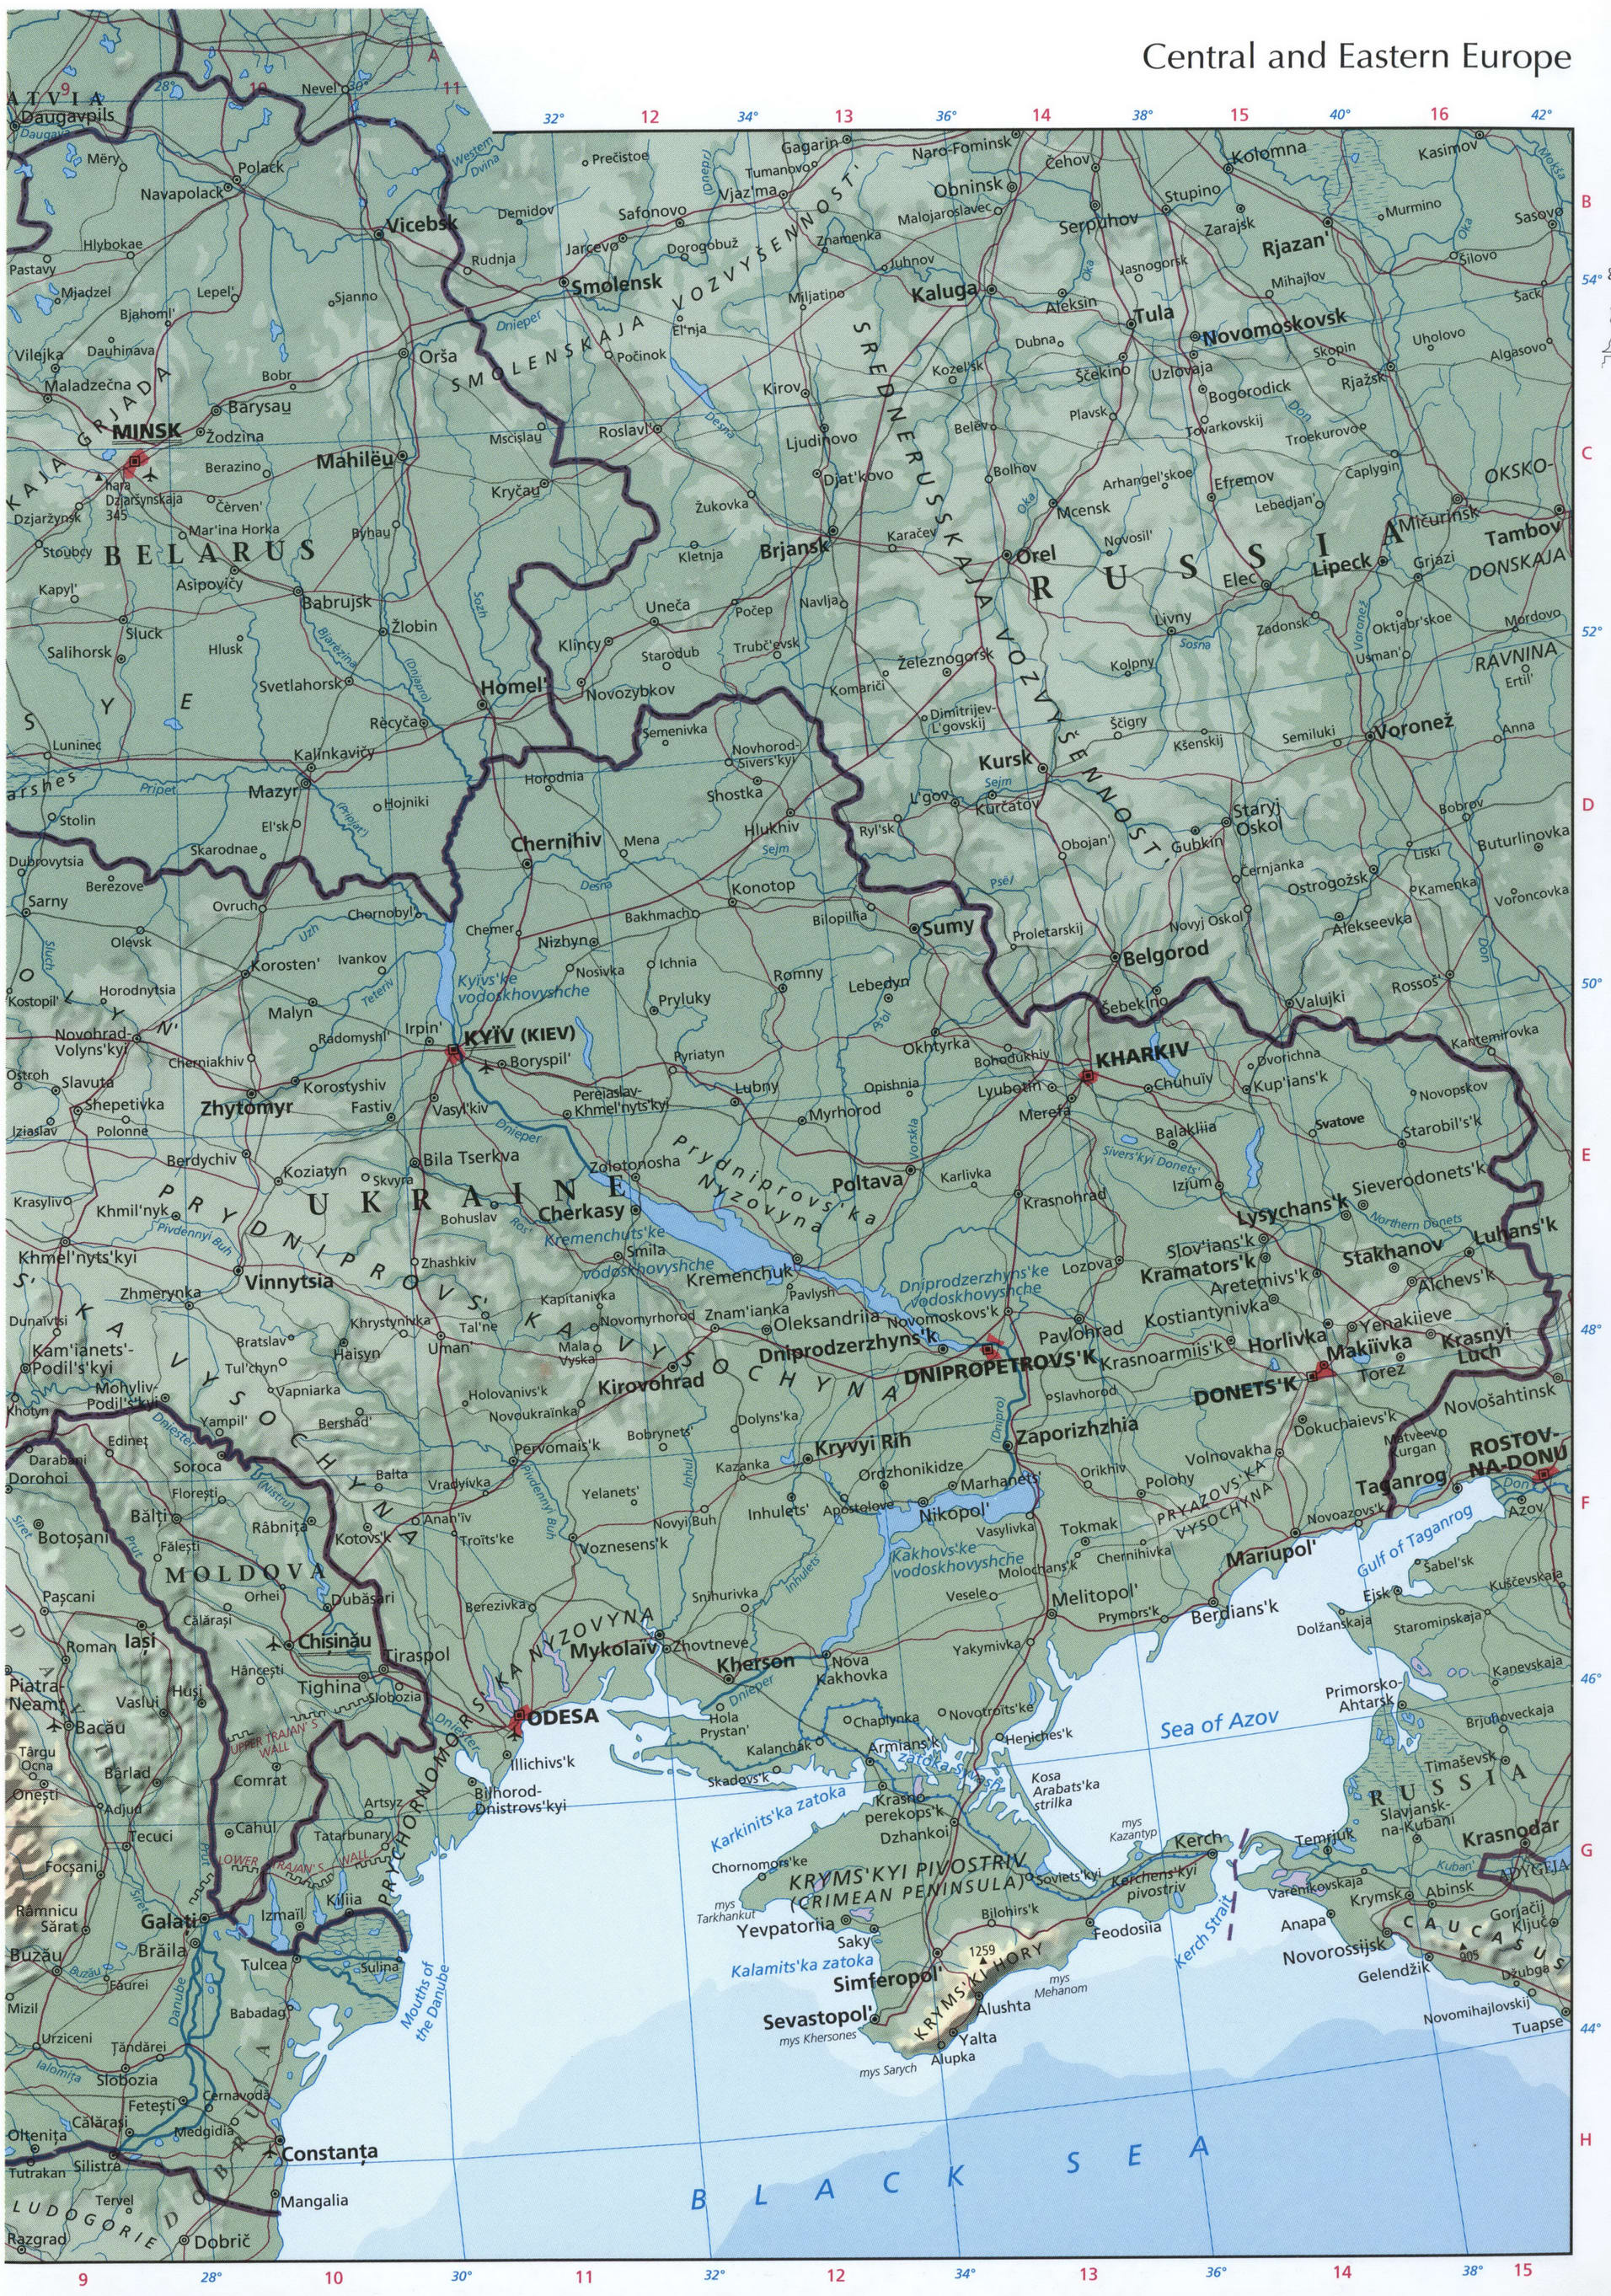 Central Europe map - eastern part